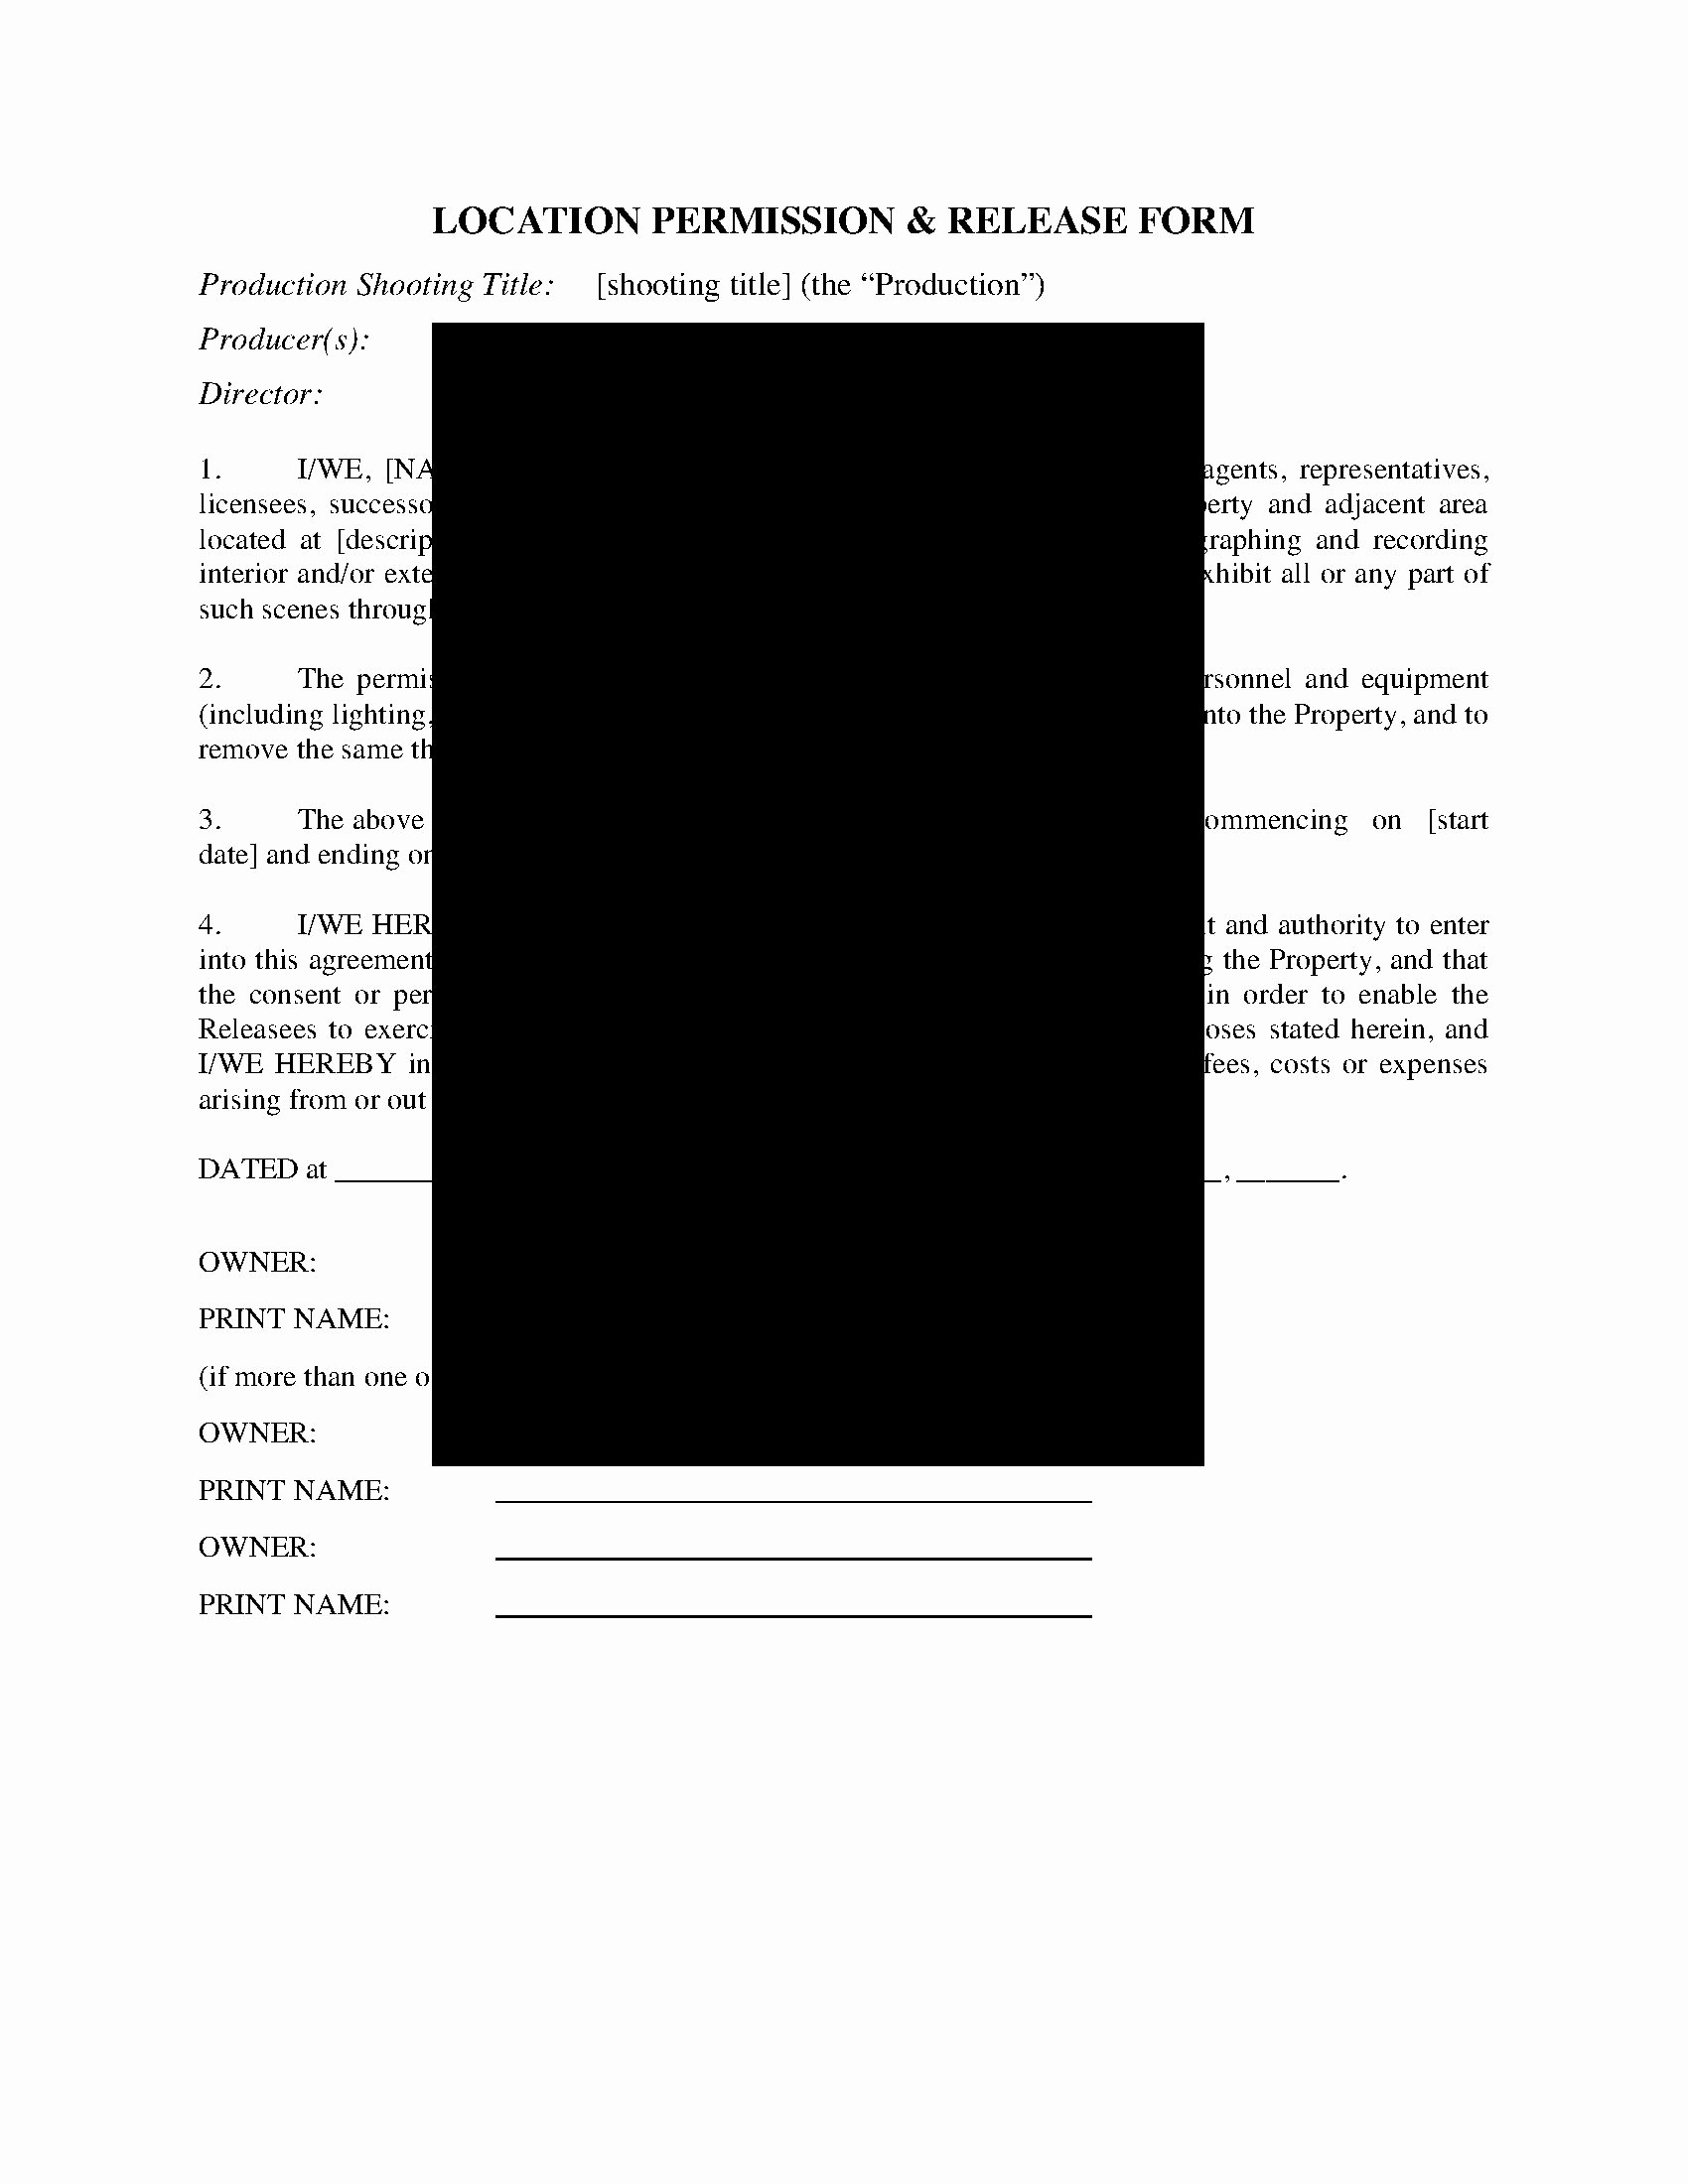 Film Release form Template Inspirational Location Permission and Release form or Tv